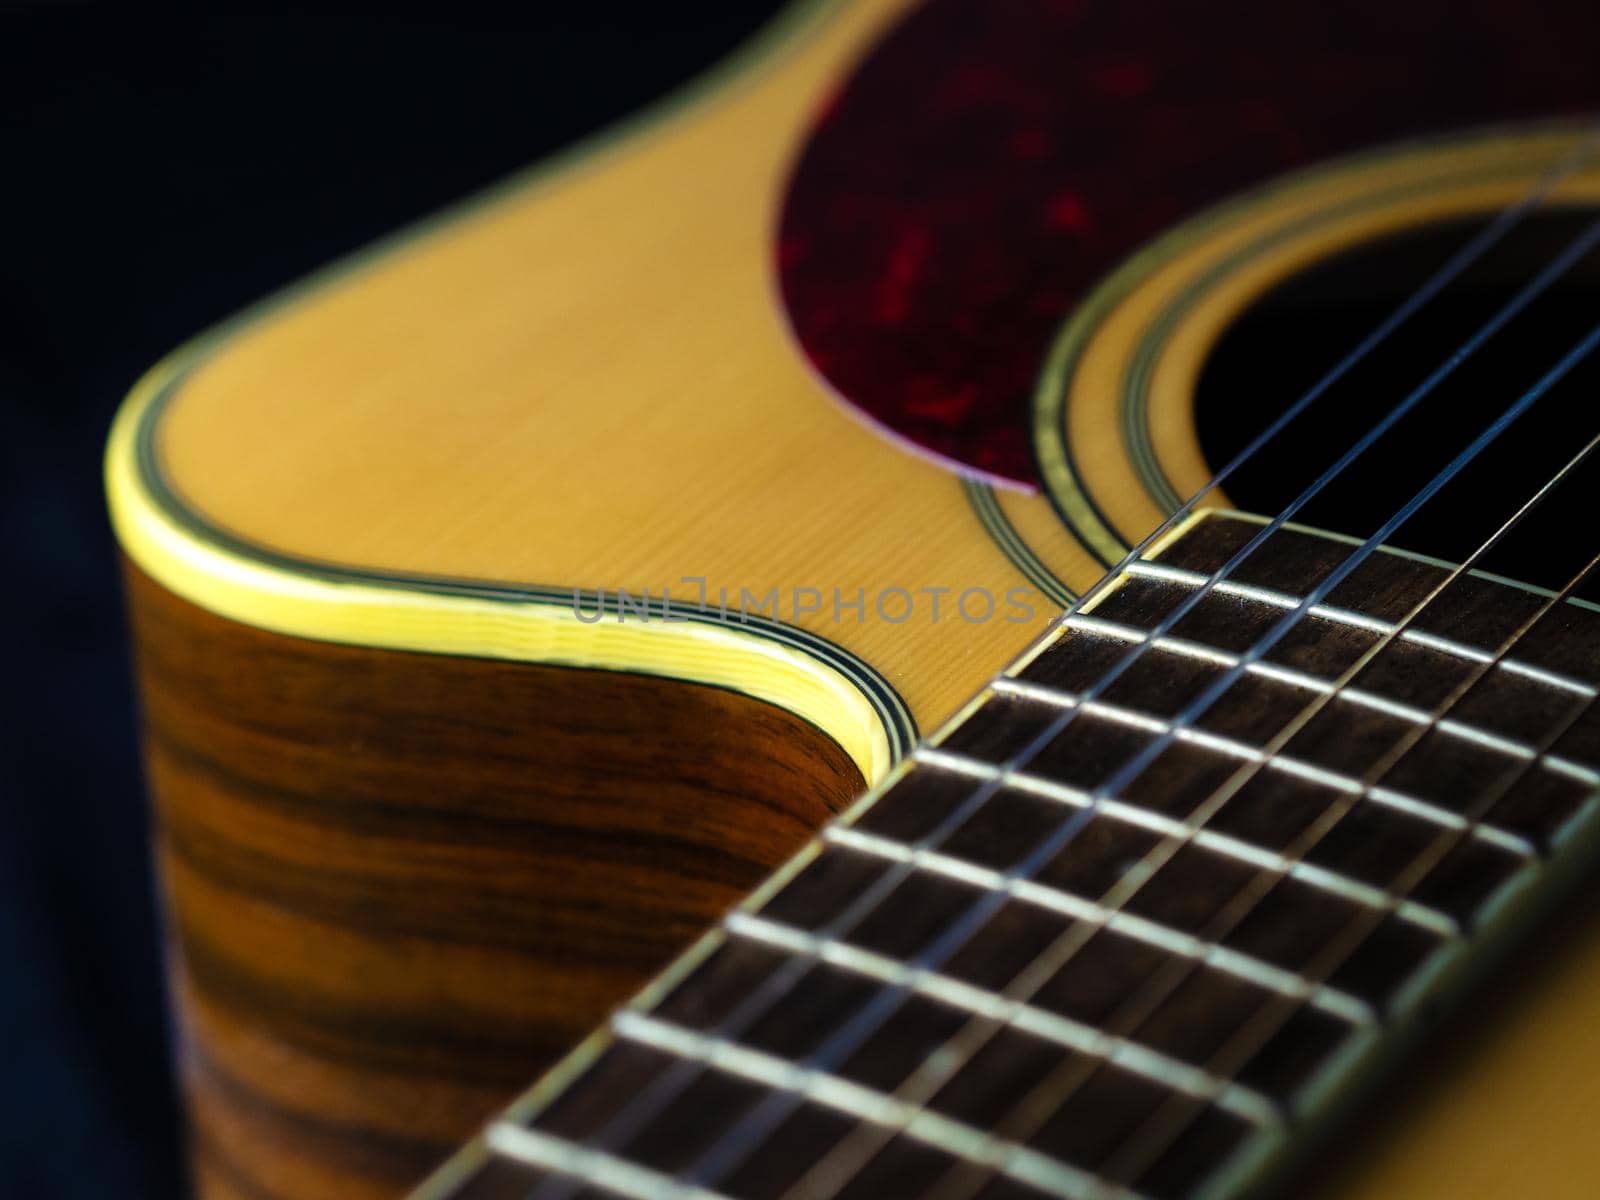 six - string acoustic guitar  on a black background. low key. music day by Andre1ns